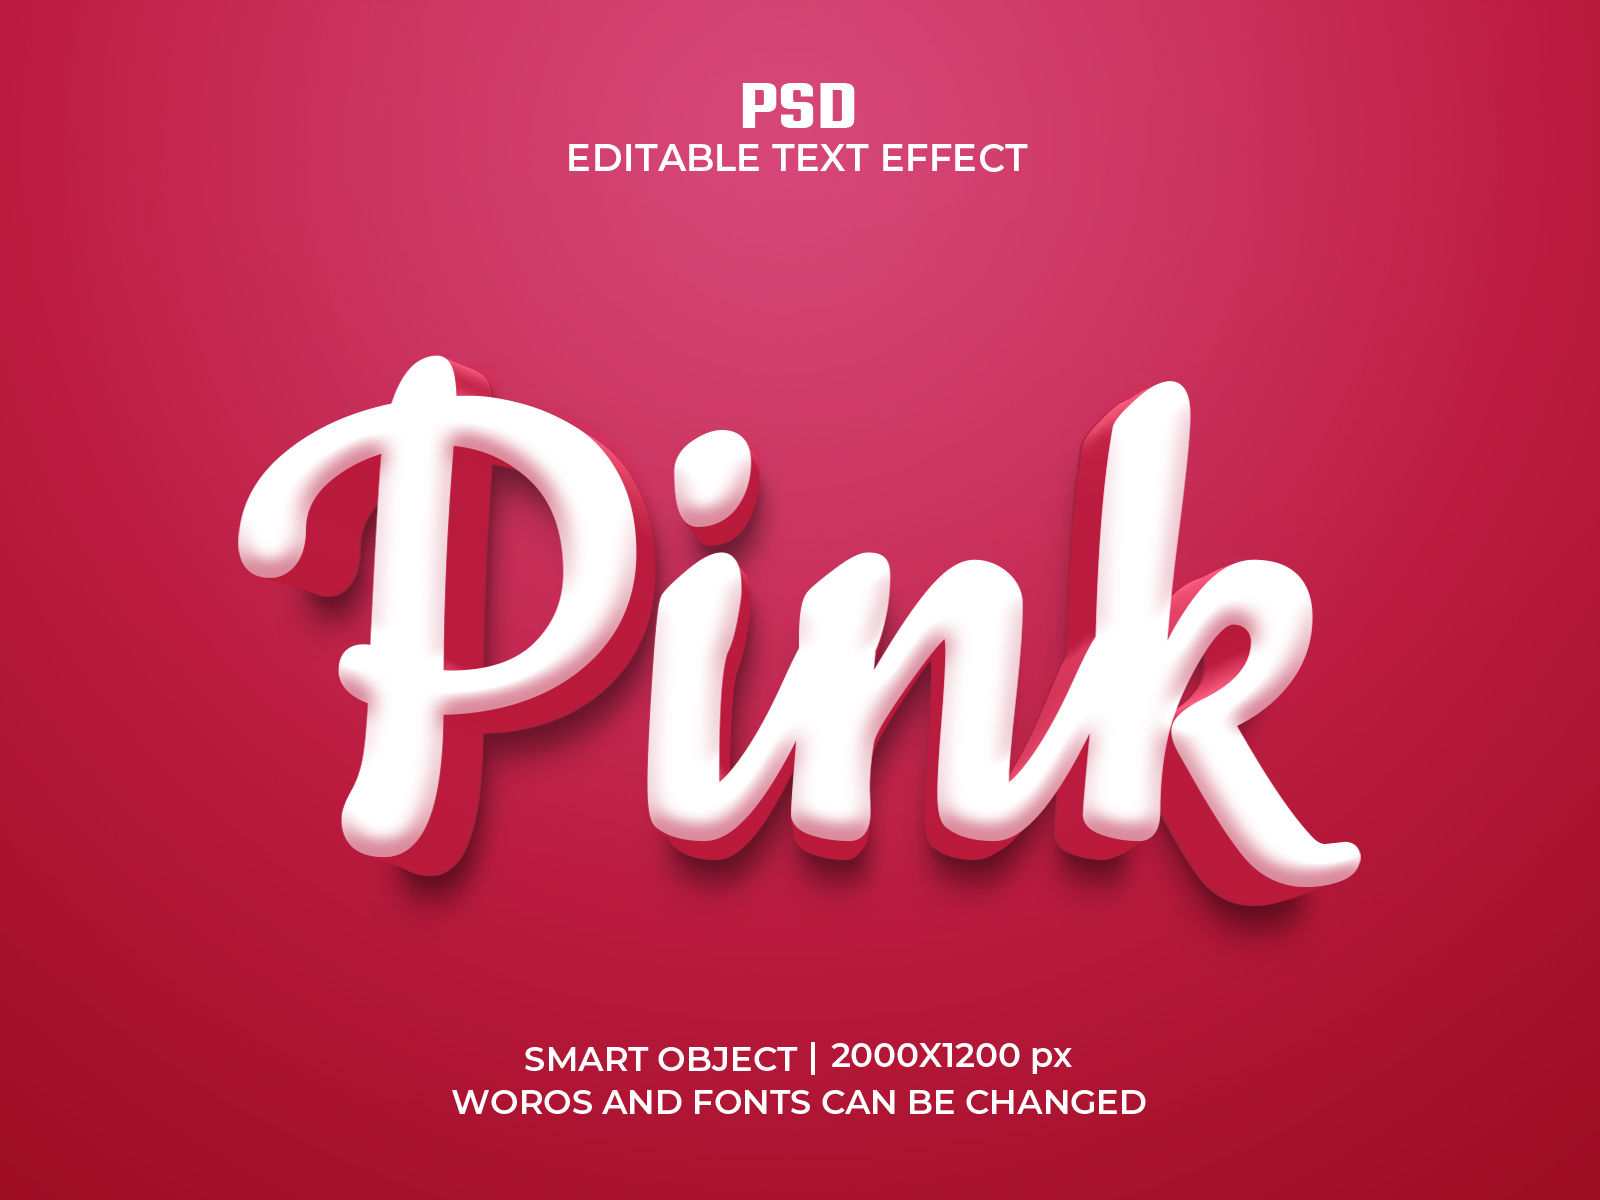 pink-editable-3d-text-effect-psd-template-by-asadul-haque-on-dribbble